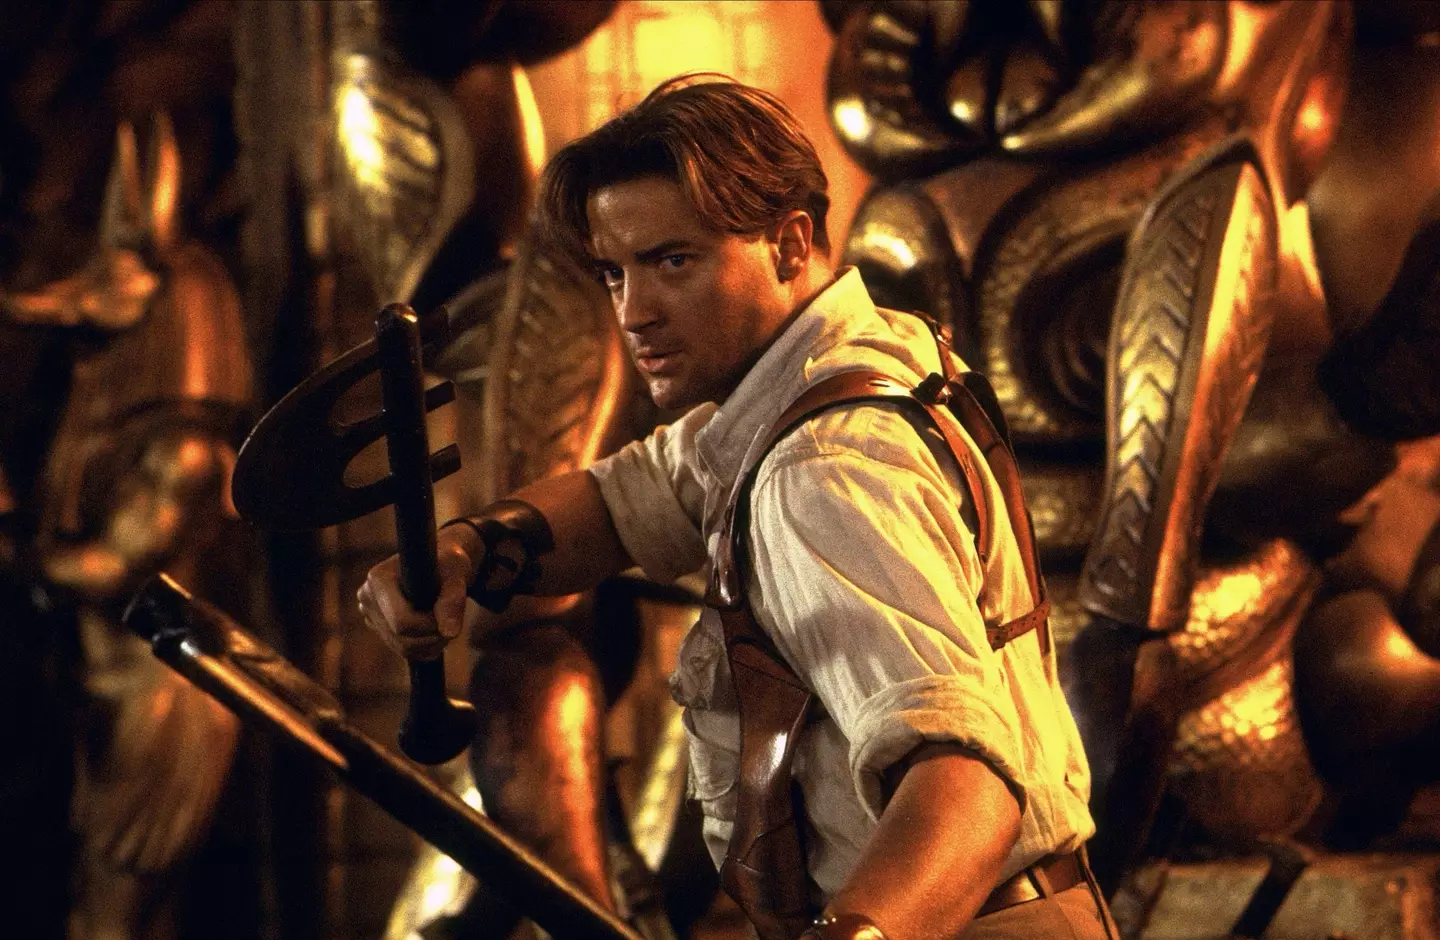 Brendan Fraser was almost choked to death while filming The Mummy.